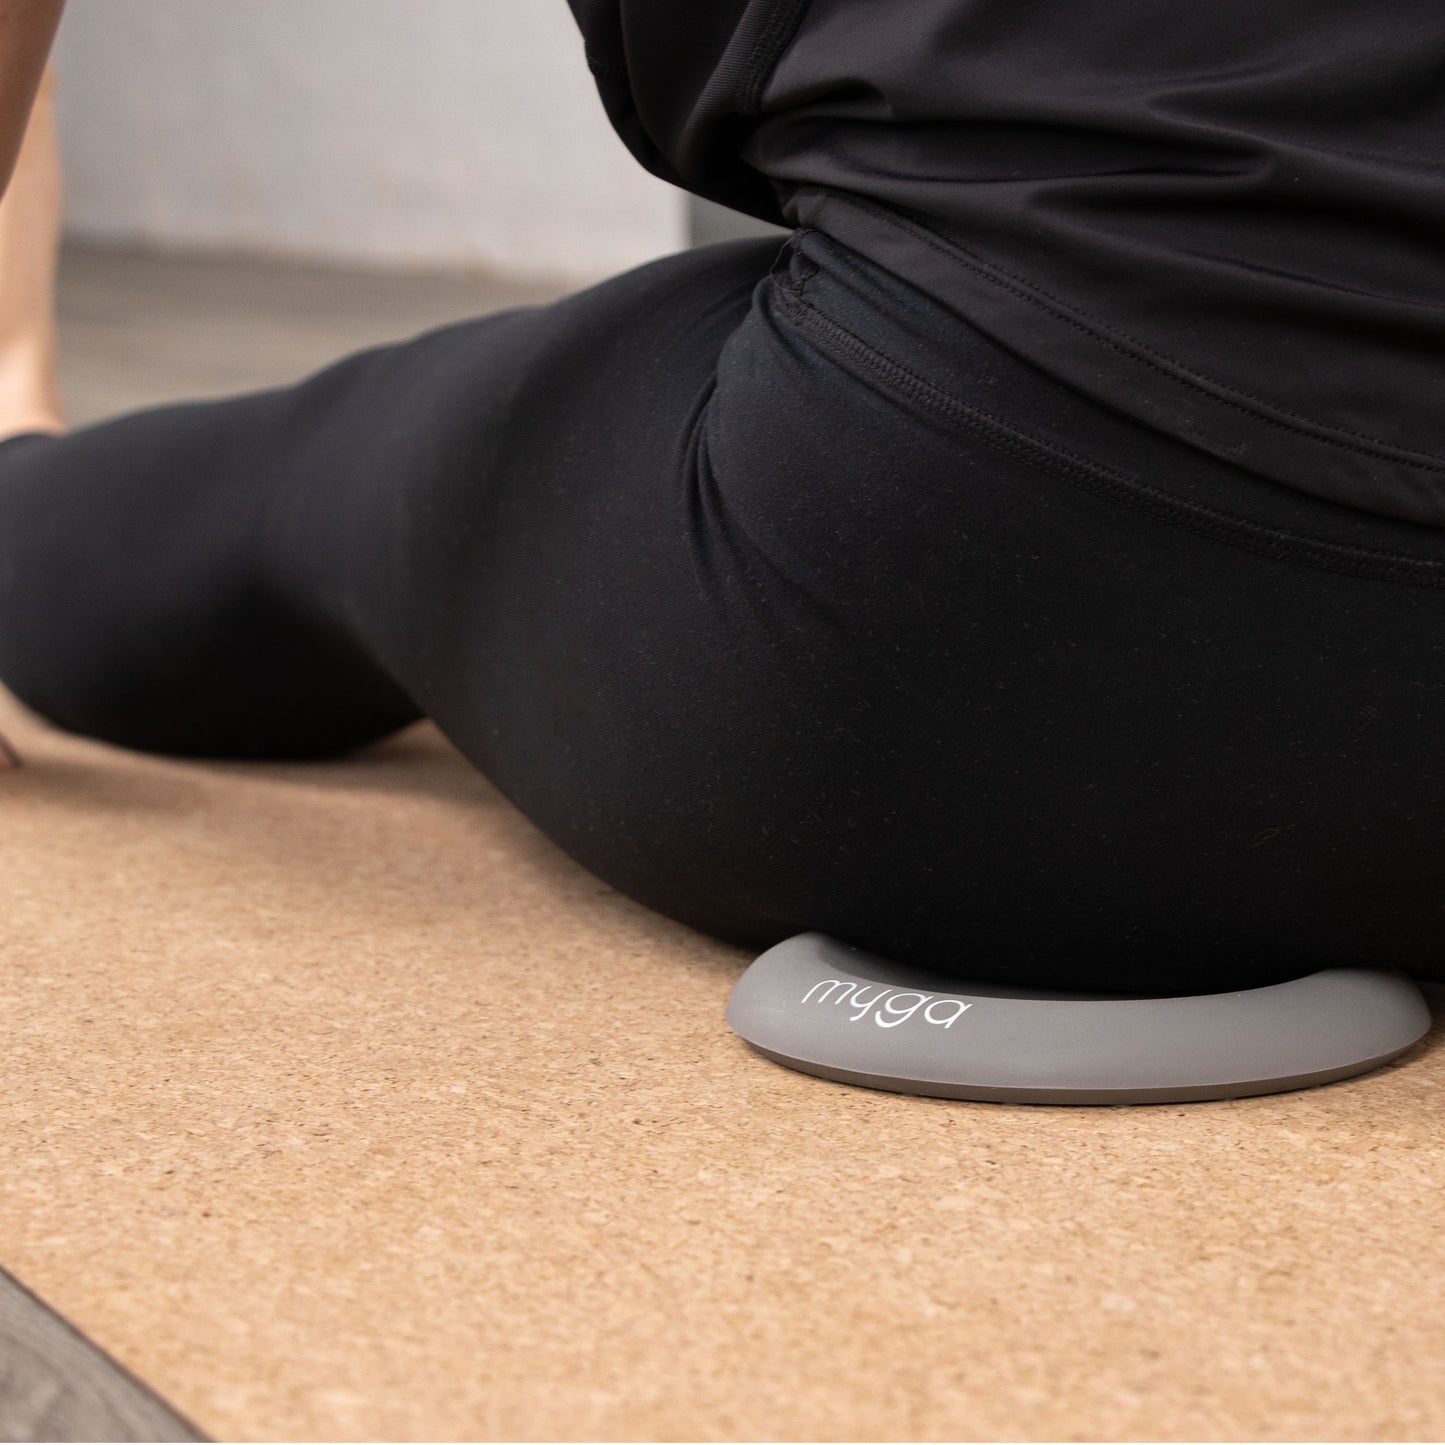 Yoga Support Jelly Pad - Grey